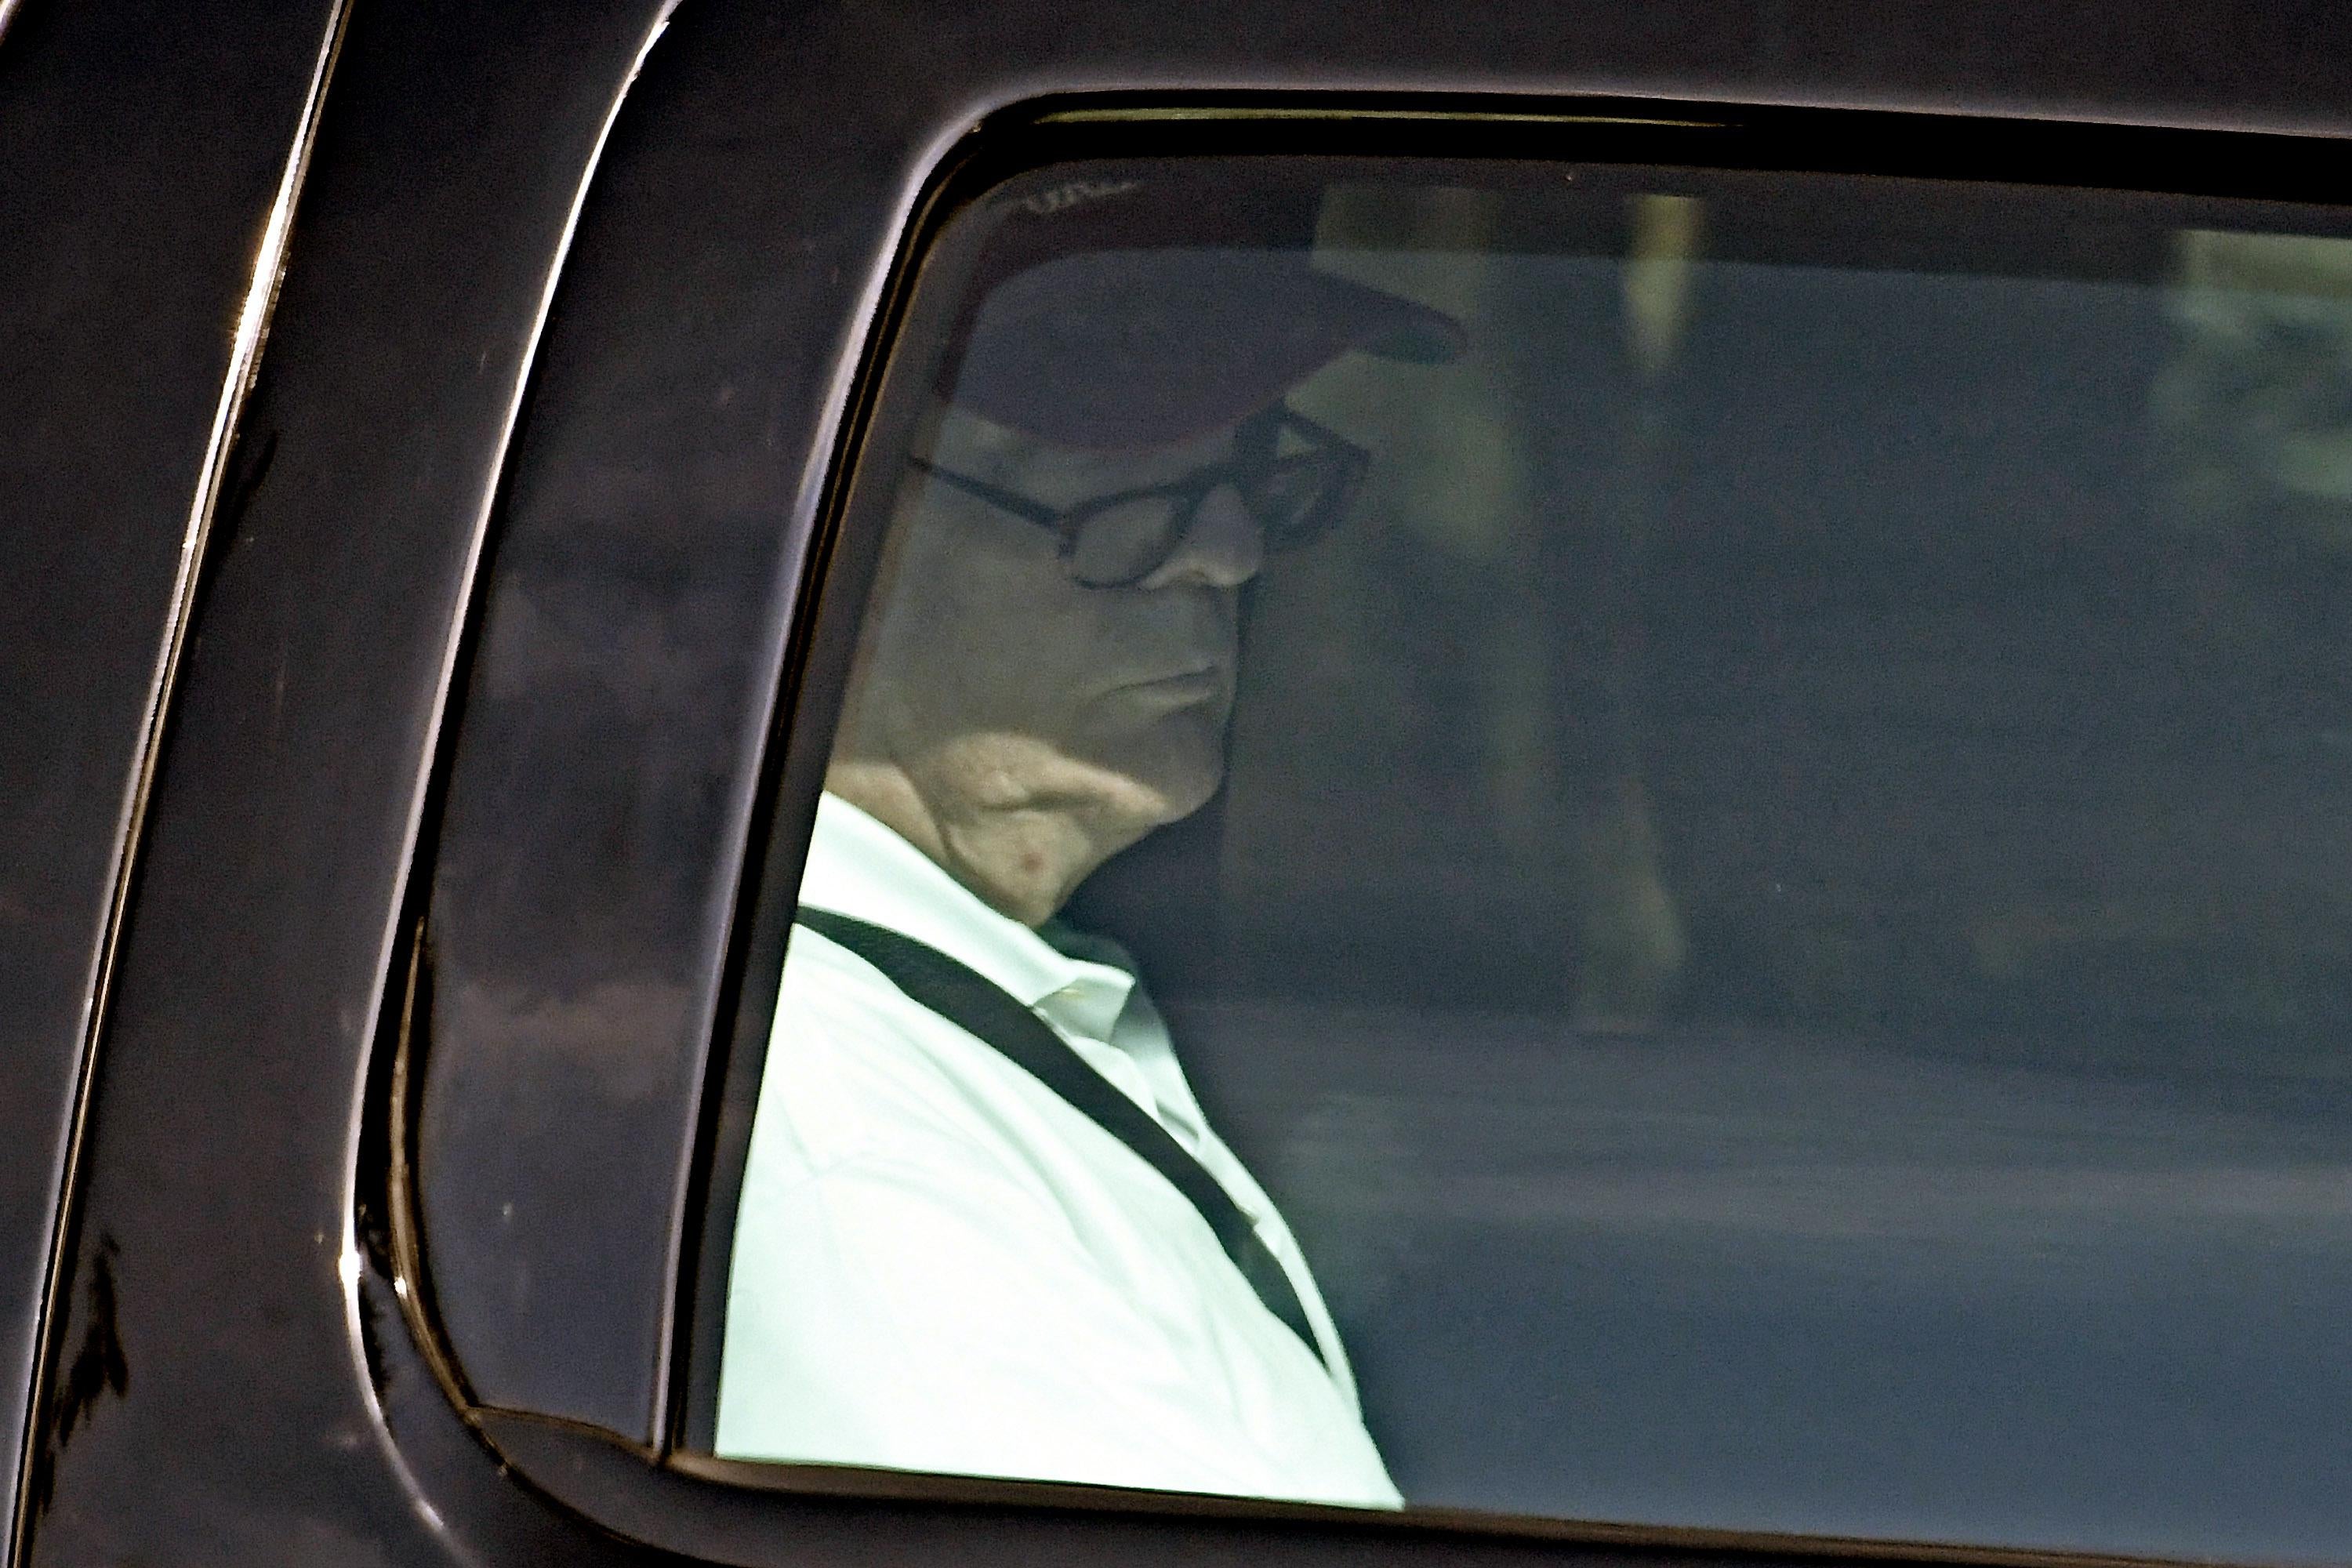 A photograph taken through Donald Trump's limo window shows him wearing glasses as he reads something out of frame.